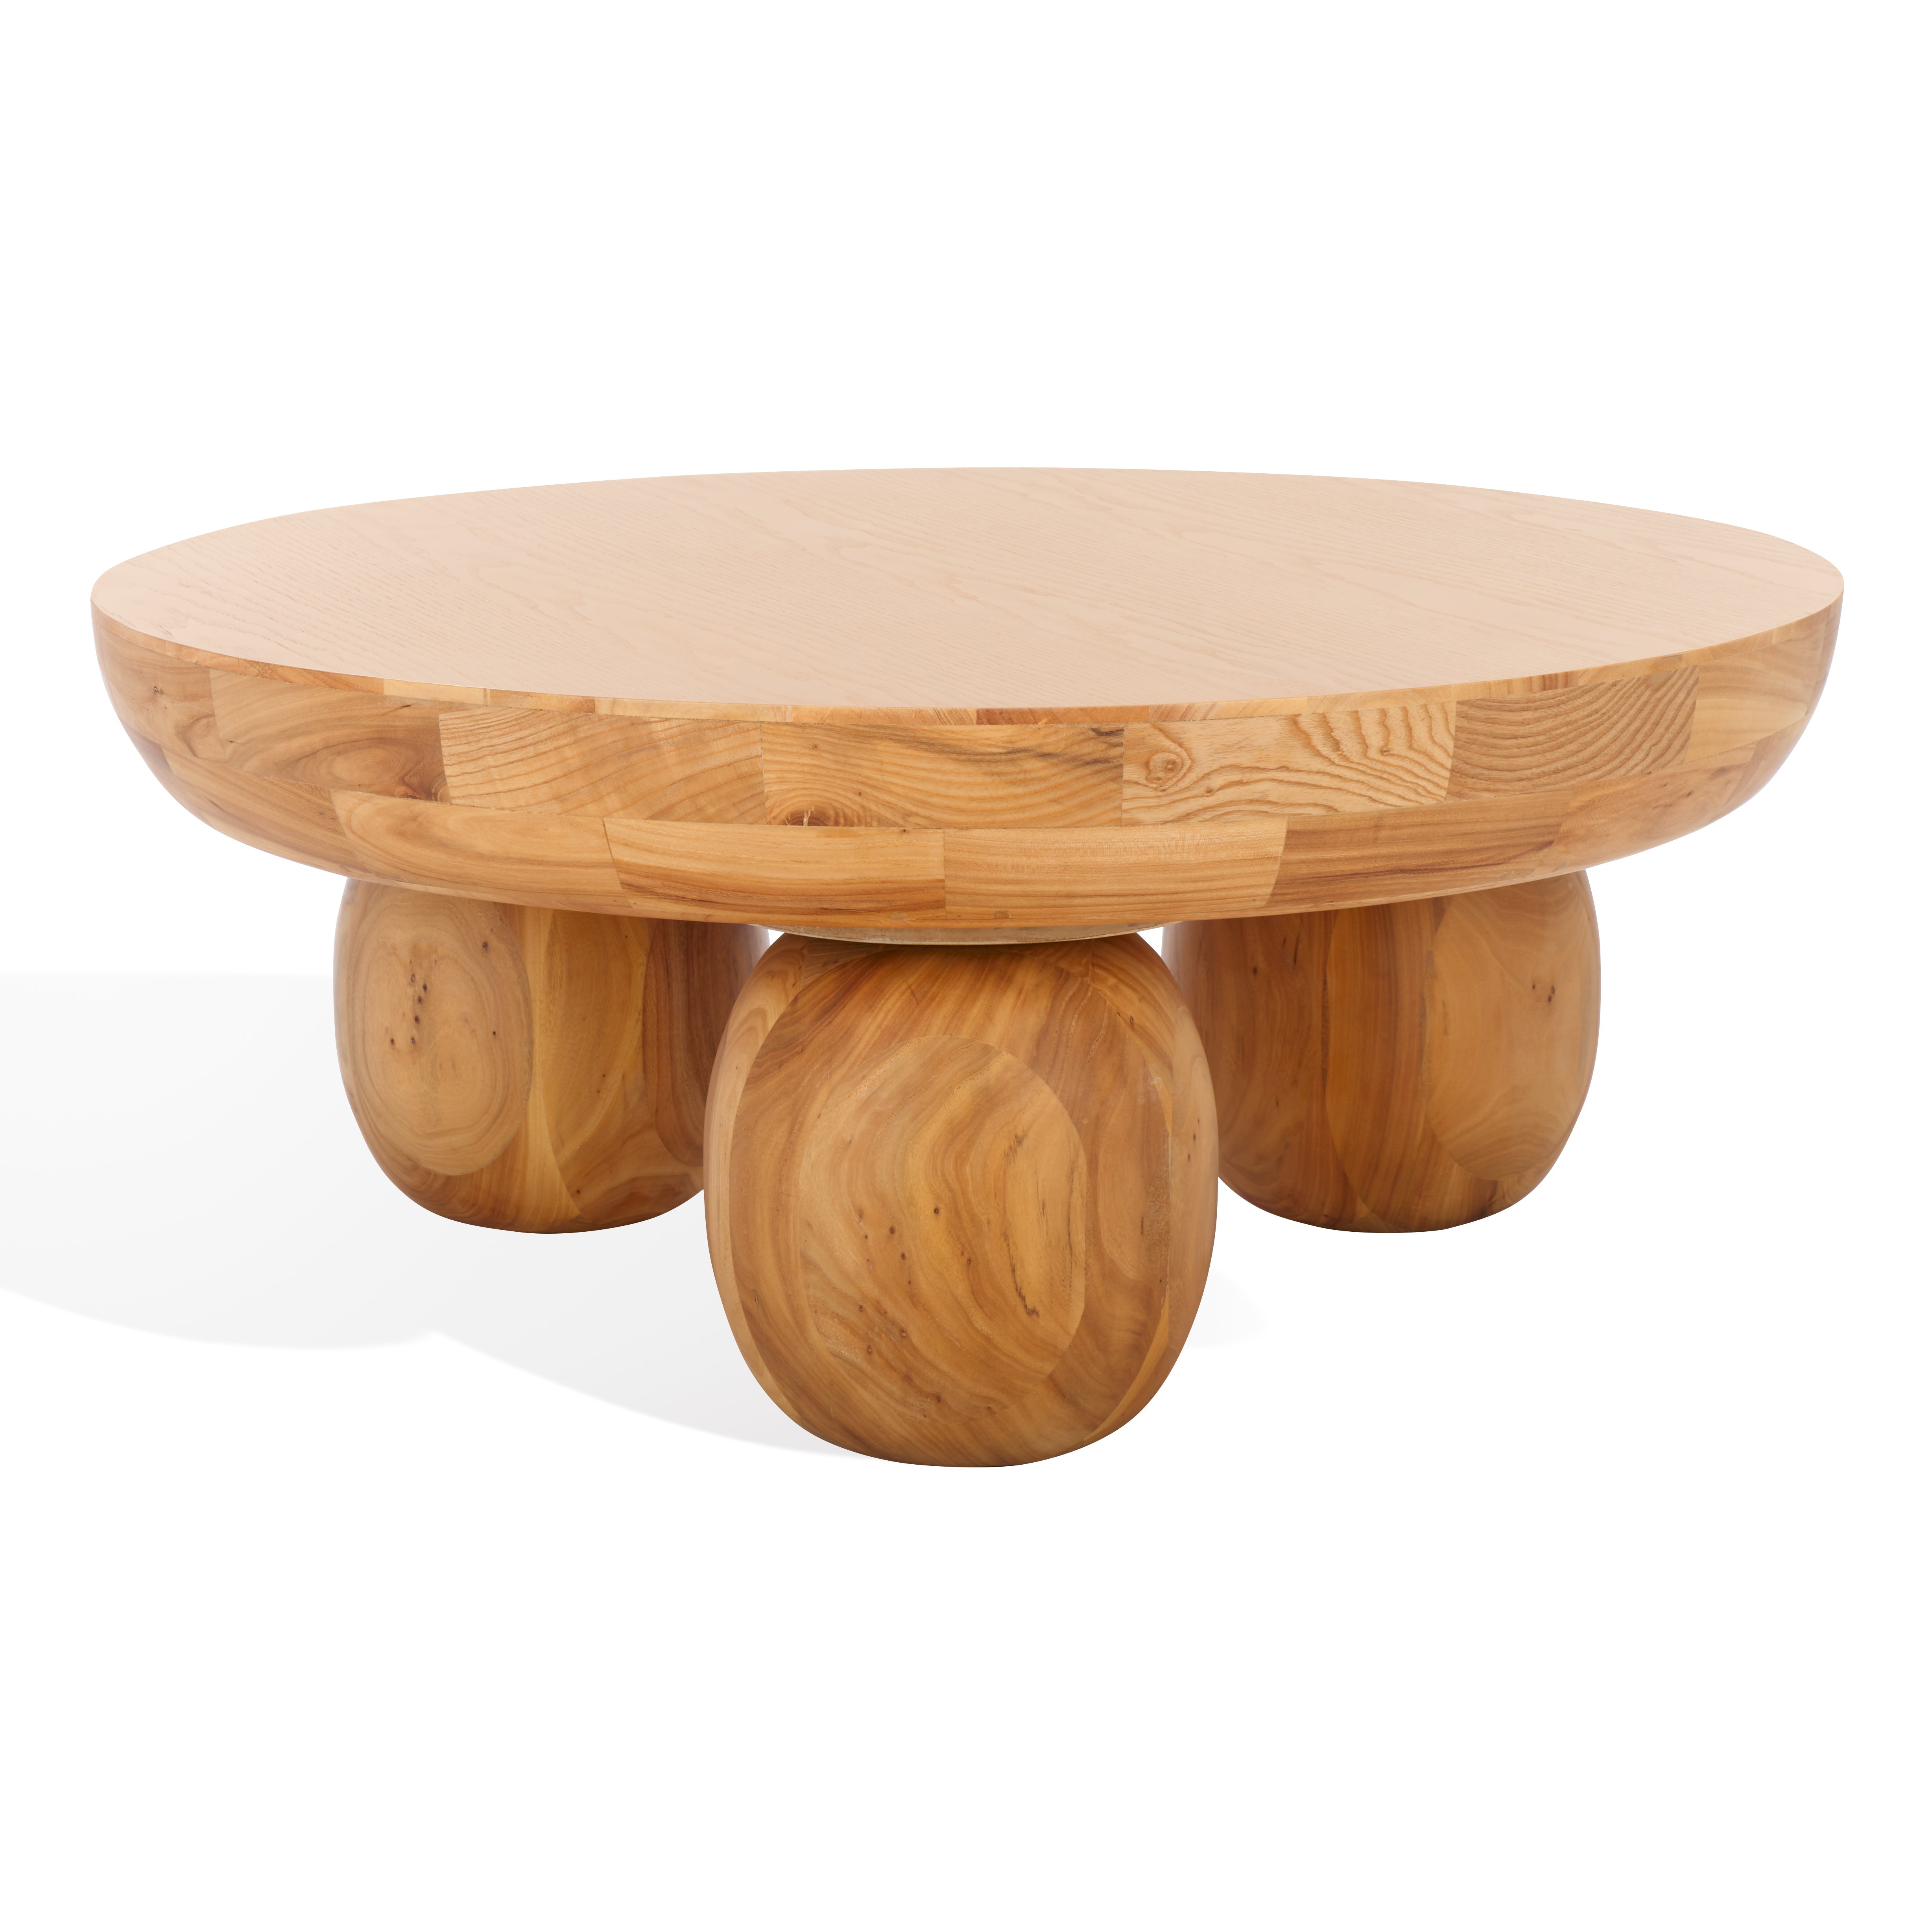 Safavieh Couture Hayliette Round Wood Coffee Table, SFV2309